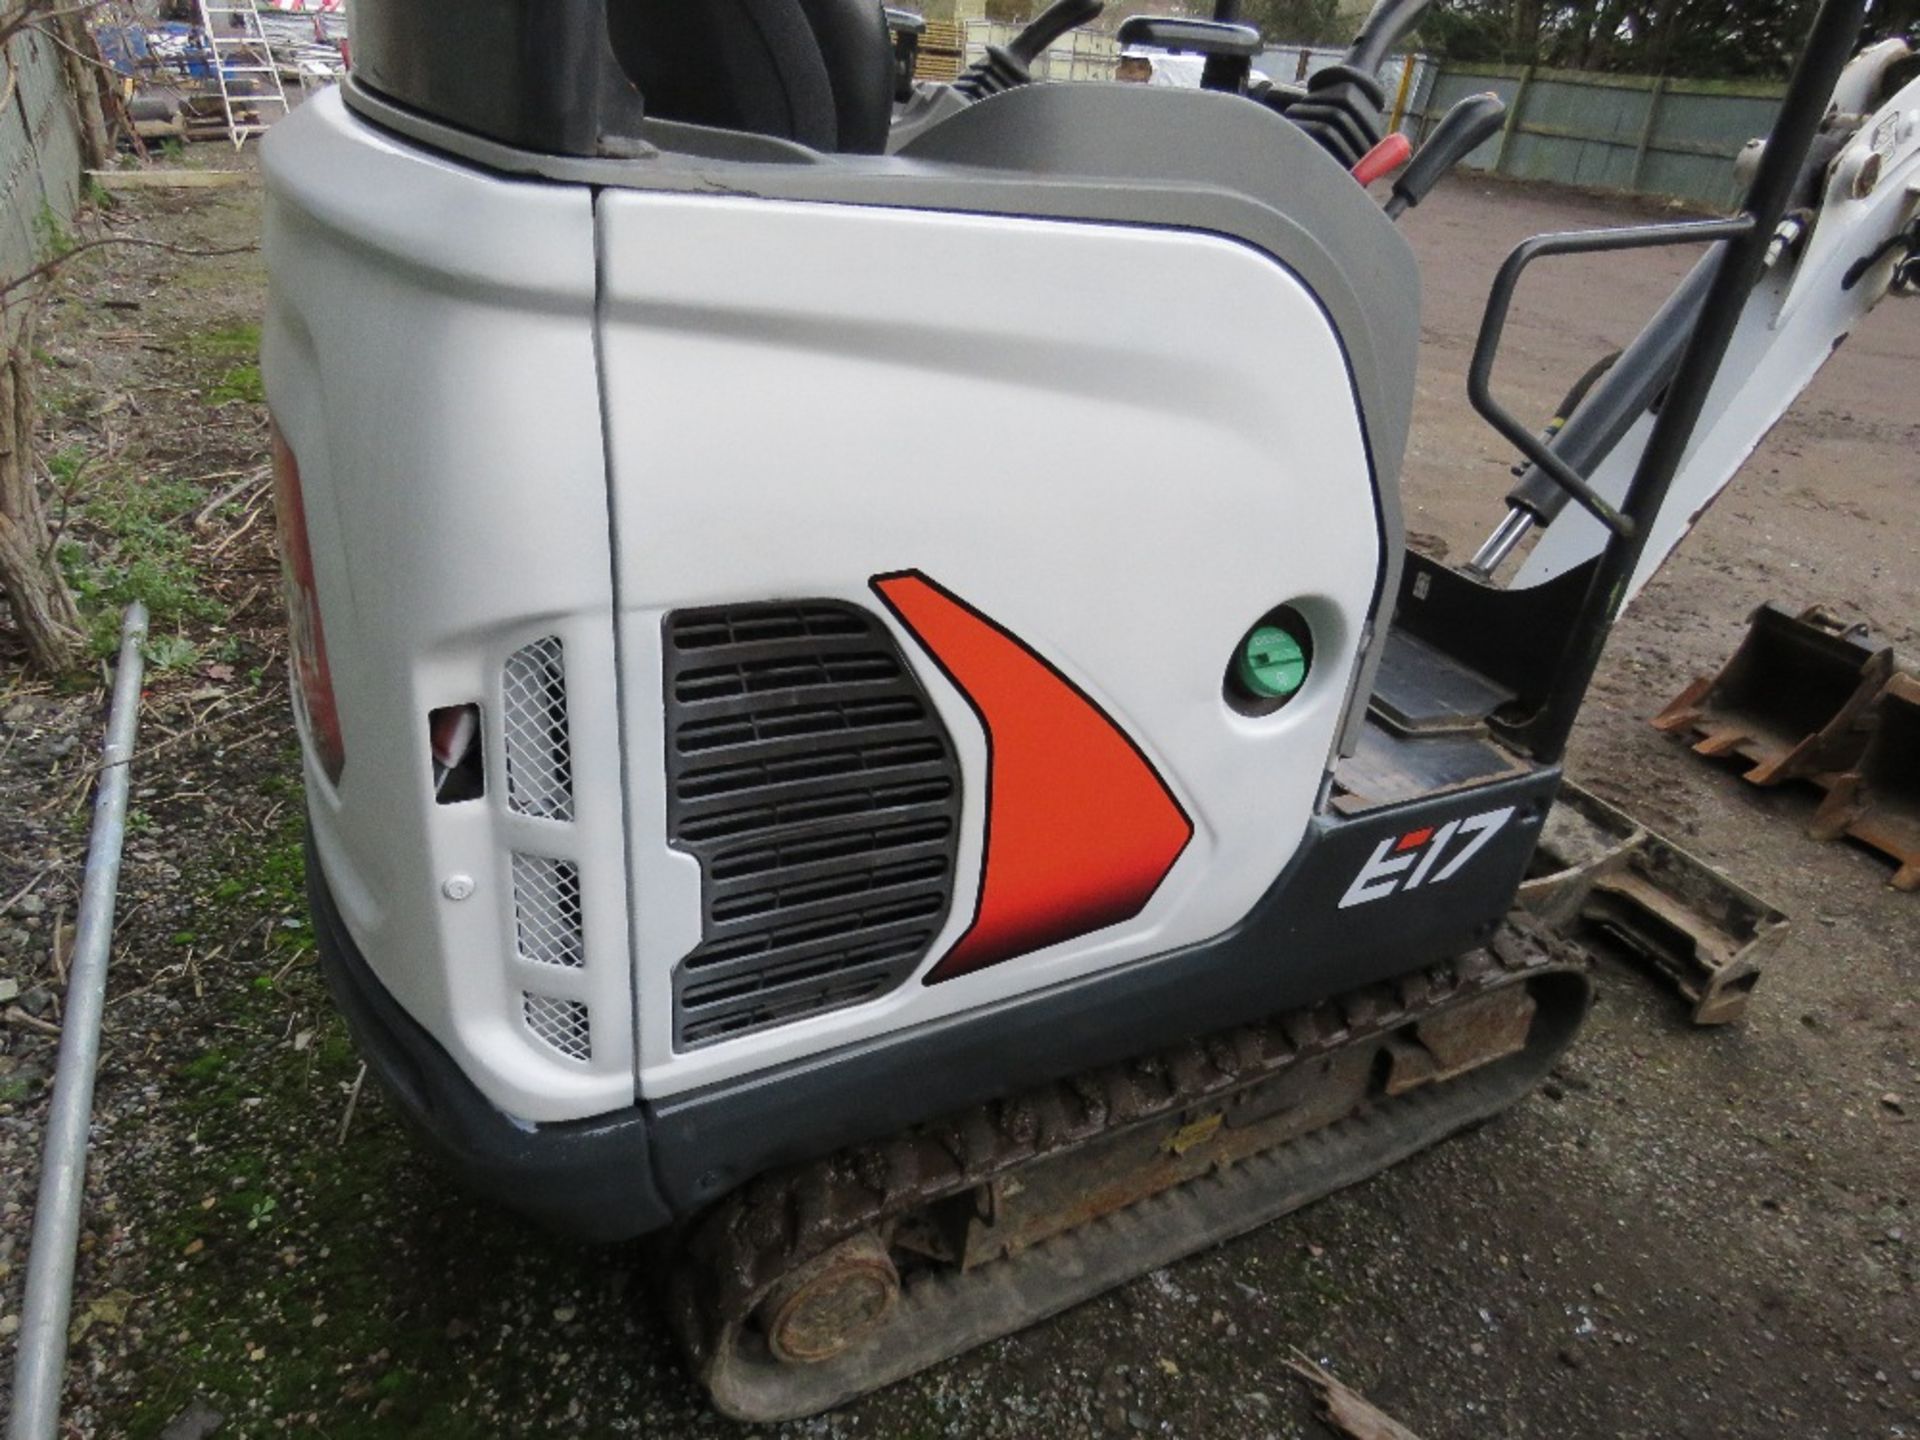 BOBCAT E17 RUBBER TRACKED MINI EXCAVATOR, YEAR 2018. SET OF 3 BUCKETS. 1116.6 REC HOURS. SN:B27H1302 - Image 8 of 15